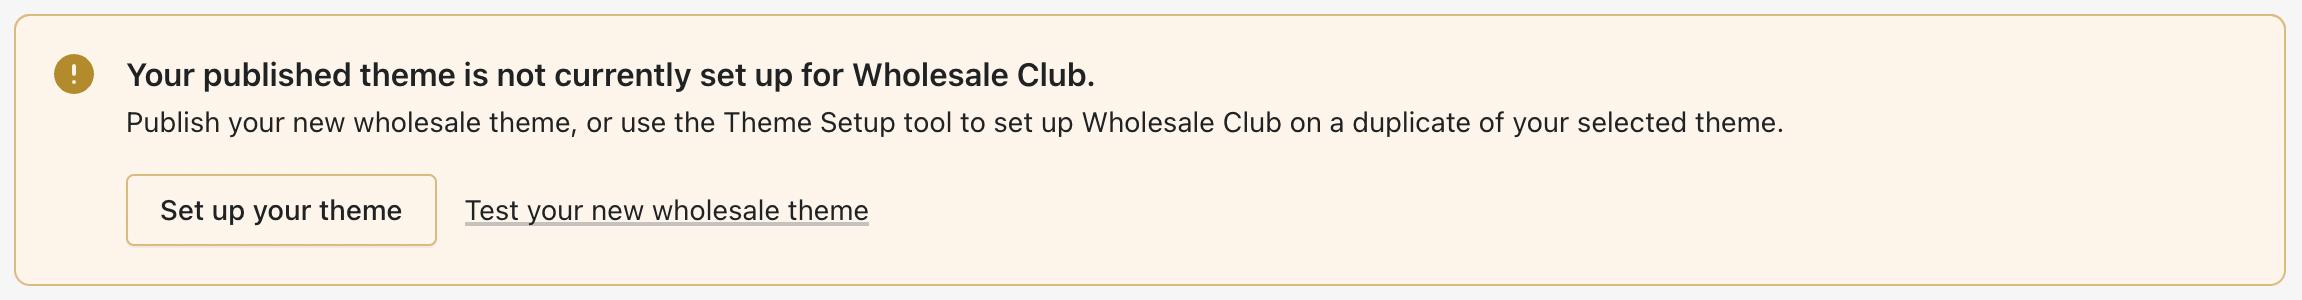 A banner in Wholesale Club's dashboard stating that the current published theme does not have Wholesale Club installed.